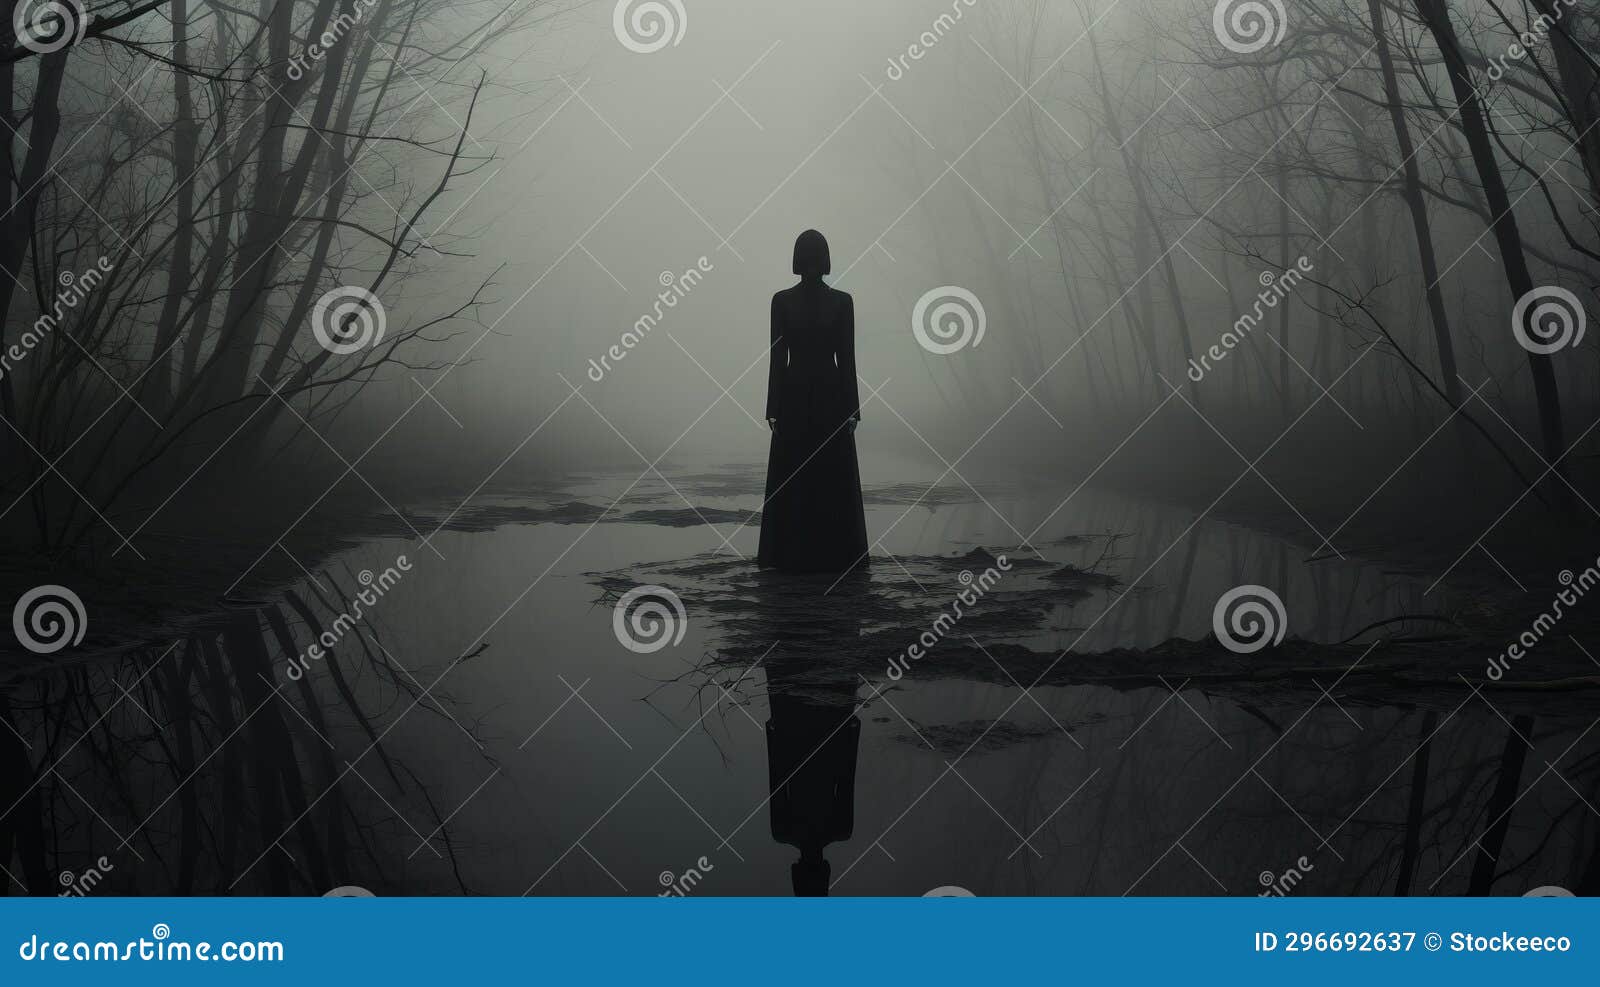 Gothic-inspired Photograph Person Emerging from Black Fog Stock ...